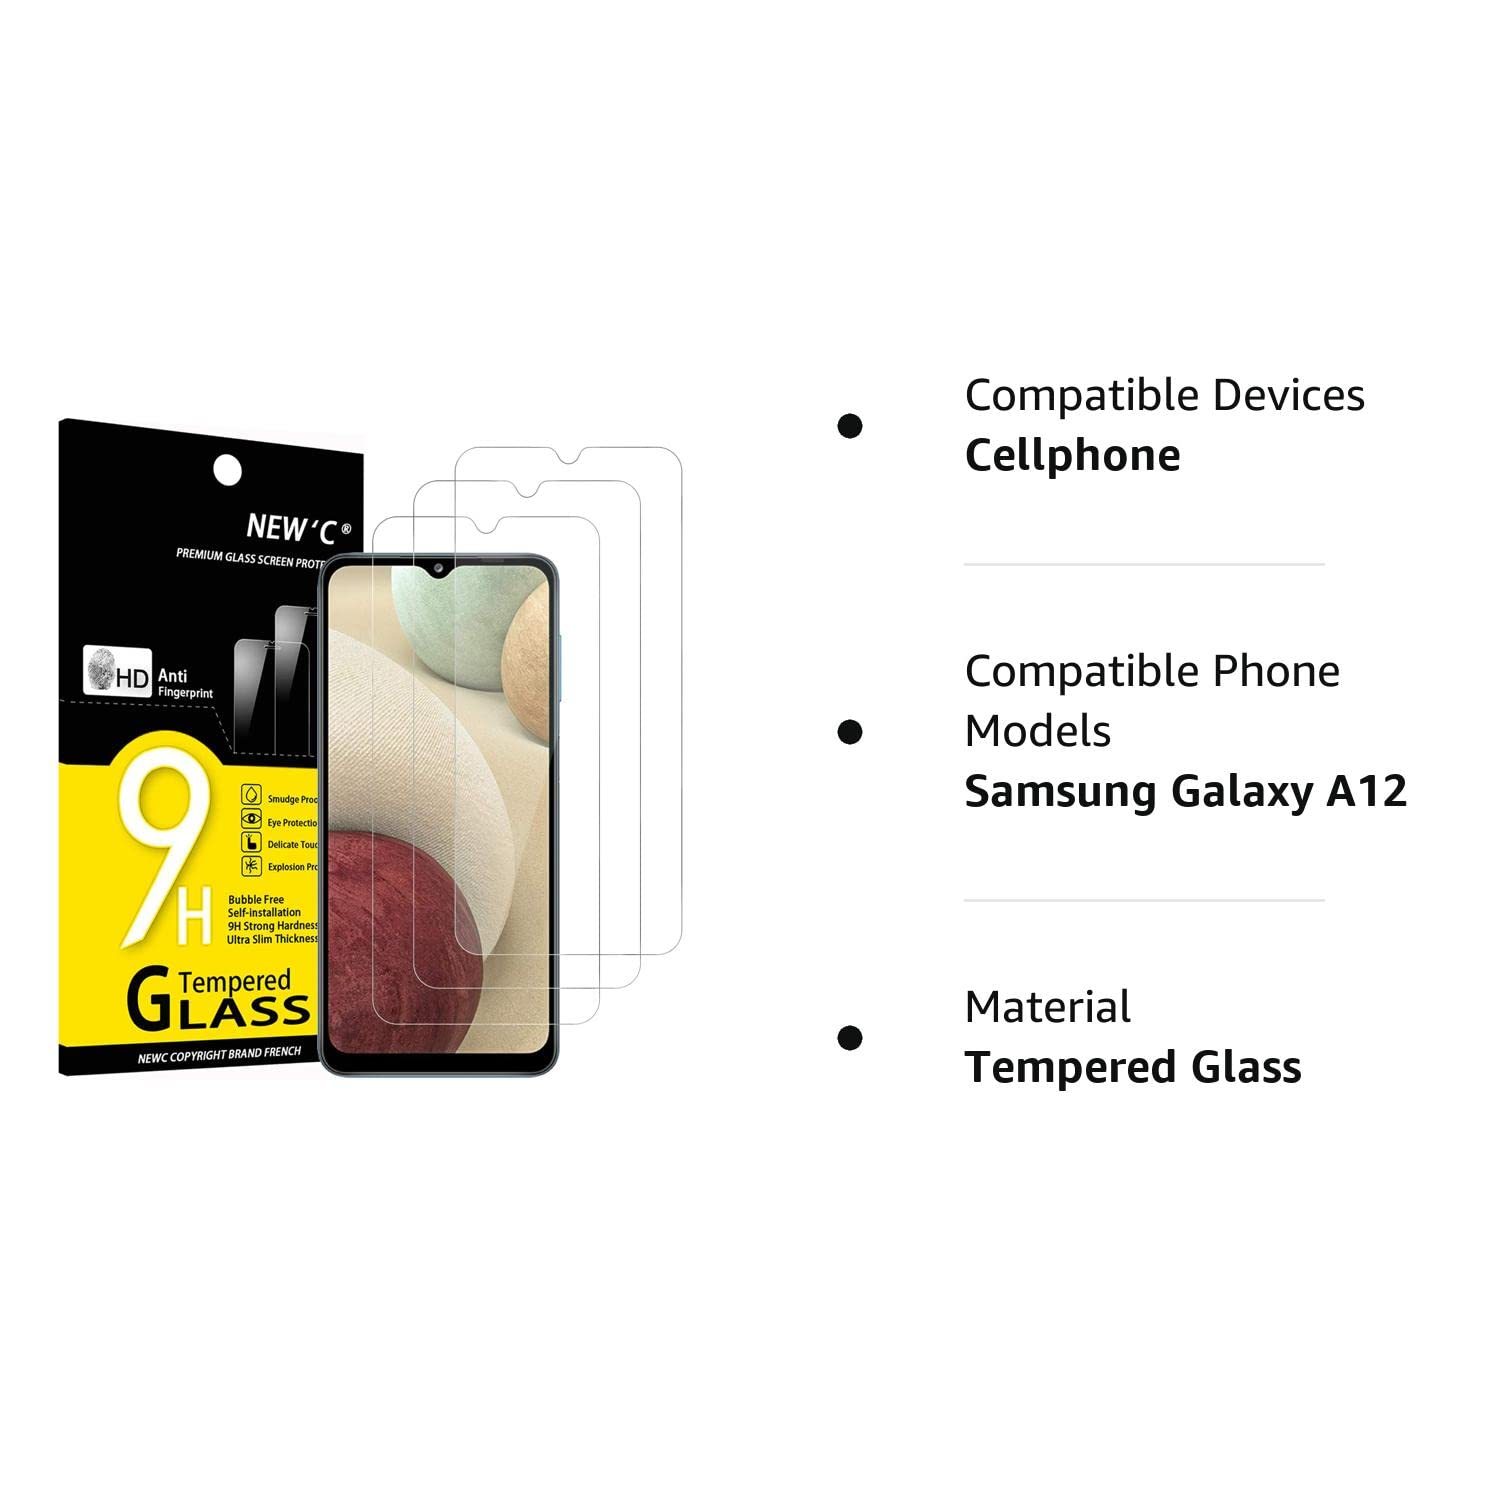 NEW'C [3 Pack] Designed for Samsung Galaxy A12, Galaxy A02s Screen Protector Tempered Glass, Case Friendly Ultra Resistant